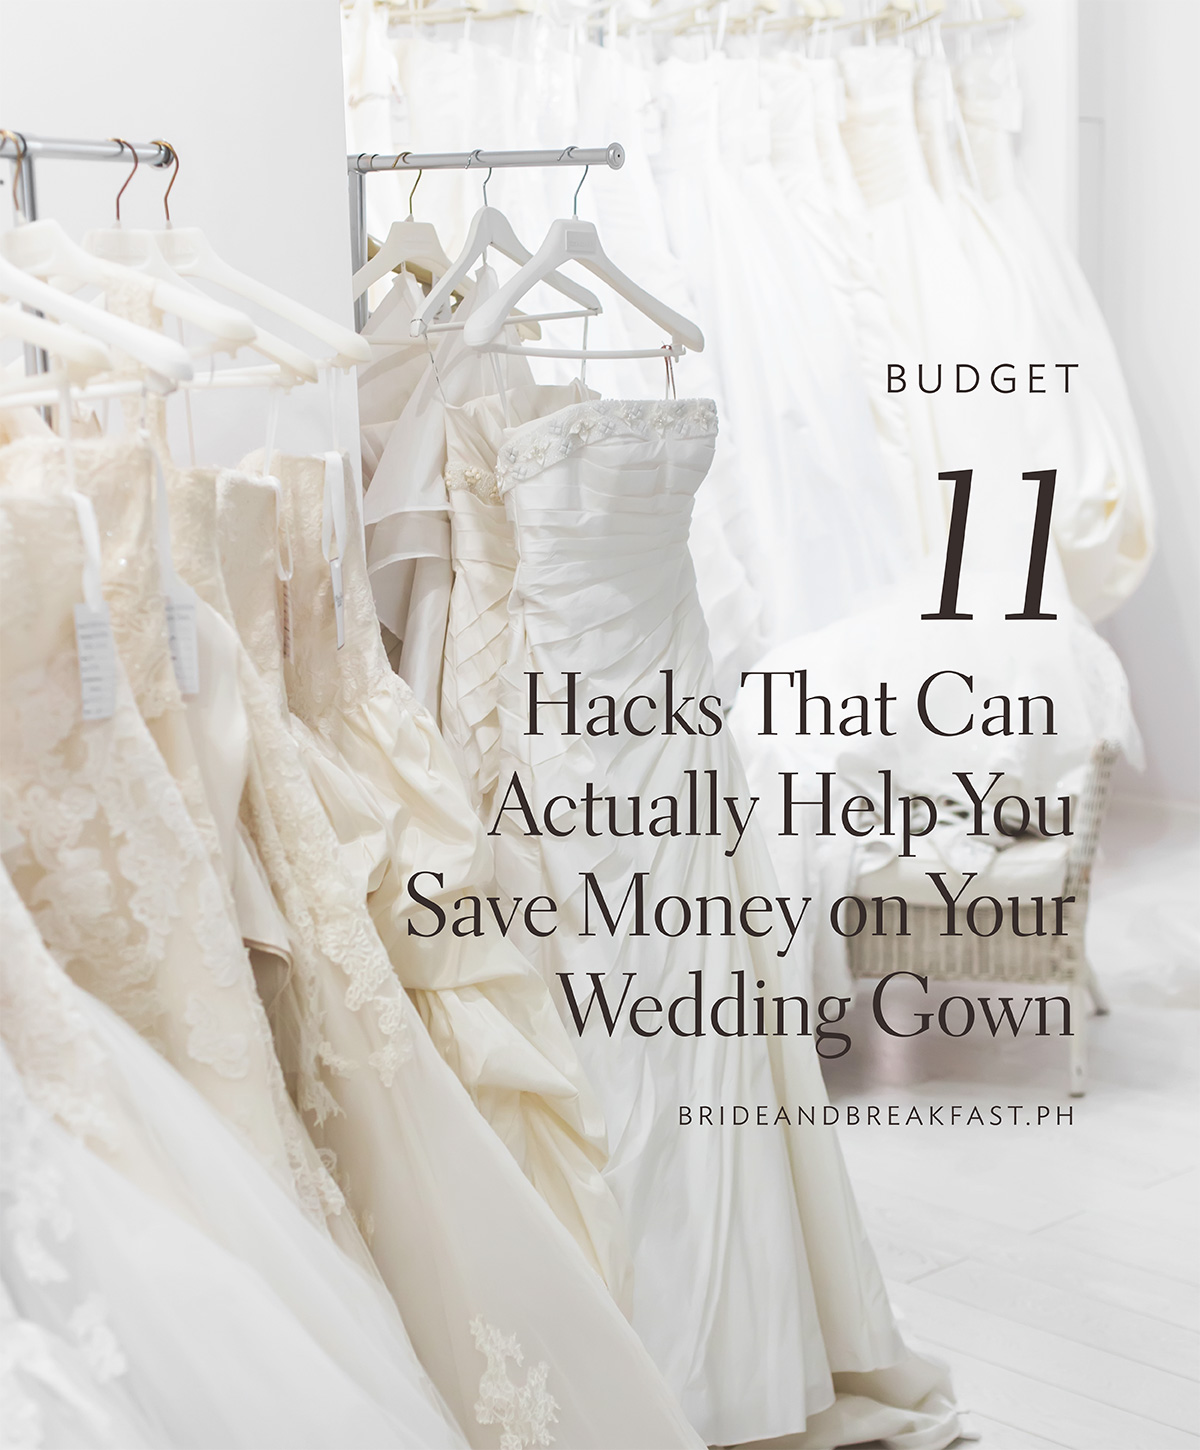 11 Hacks that can actually help you save money on your wedding gown